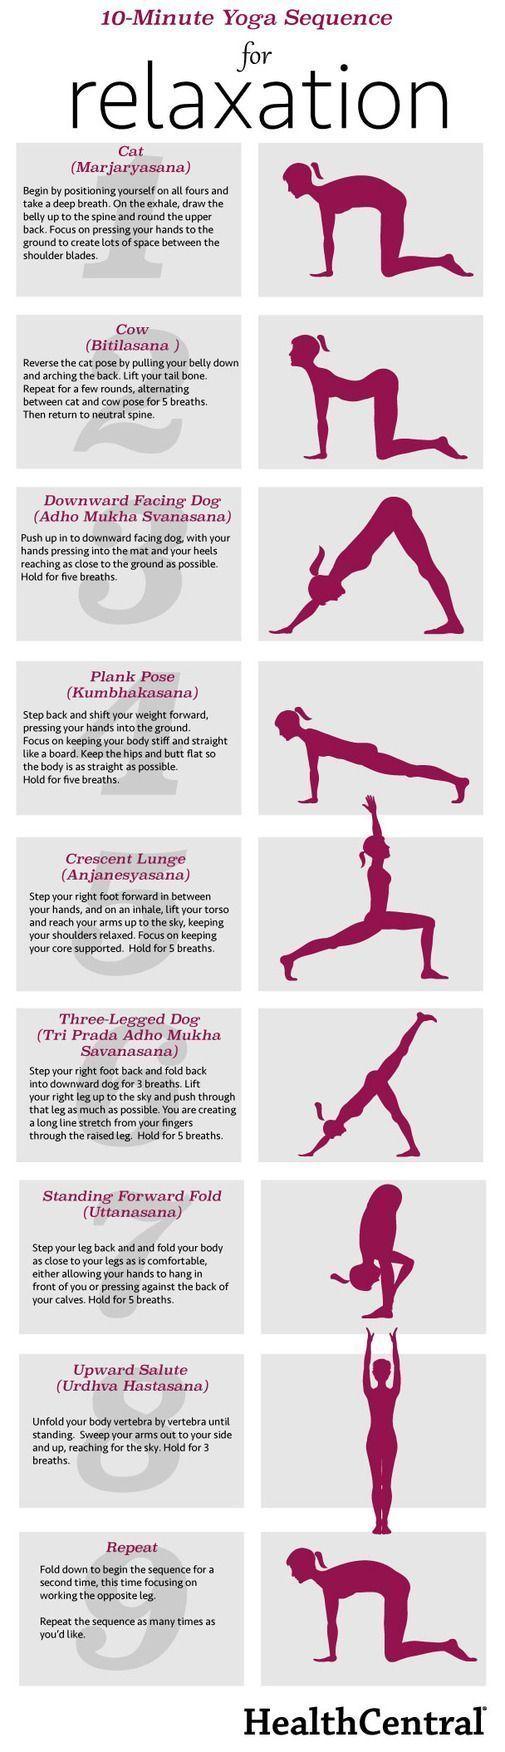 Wedding - 10-Minute Yoga Sequence For Relaxation (INFOGRAPHIC) - Exercise - Anxiety